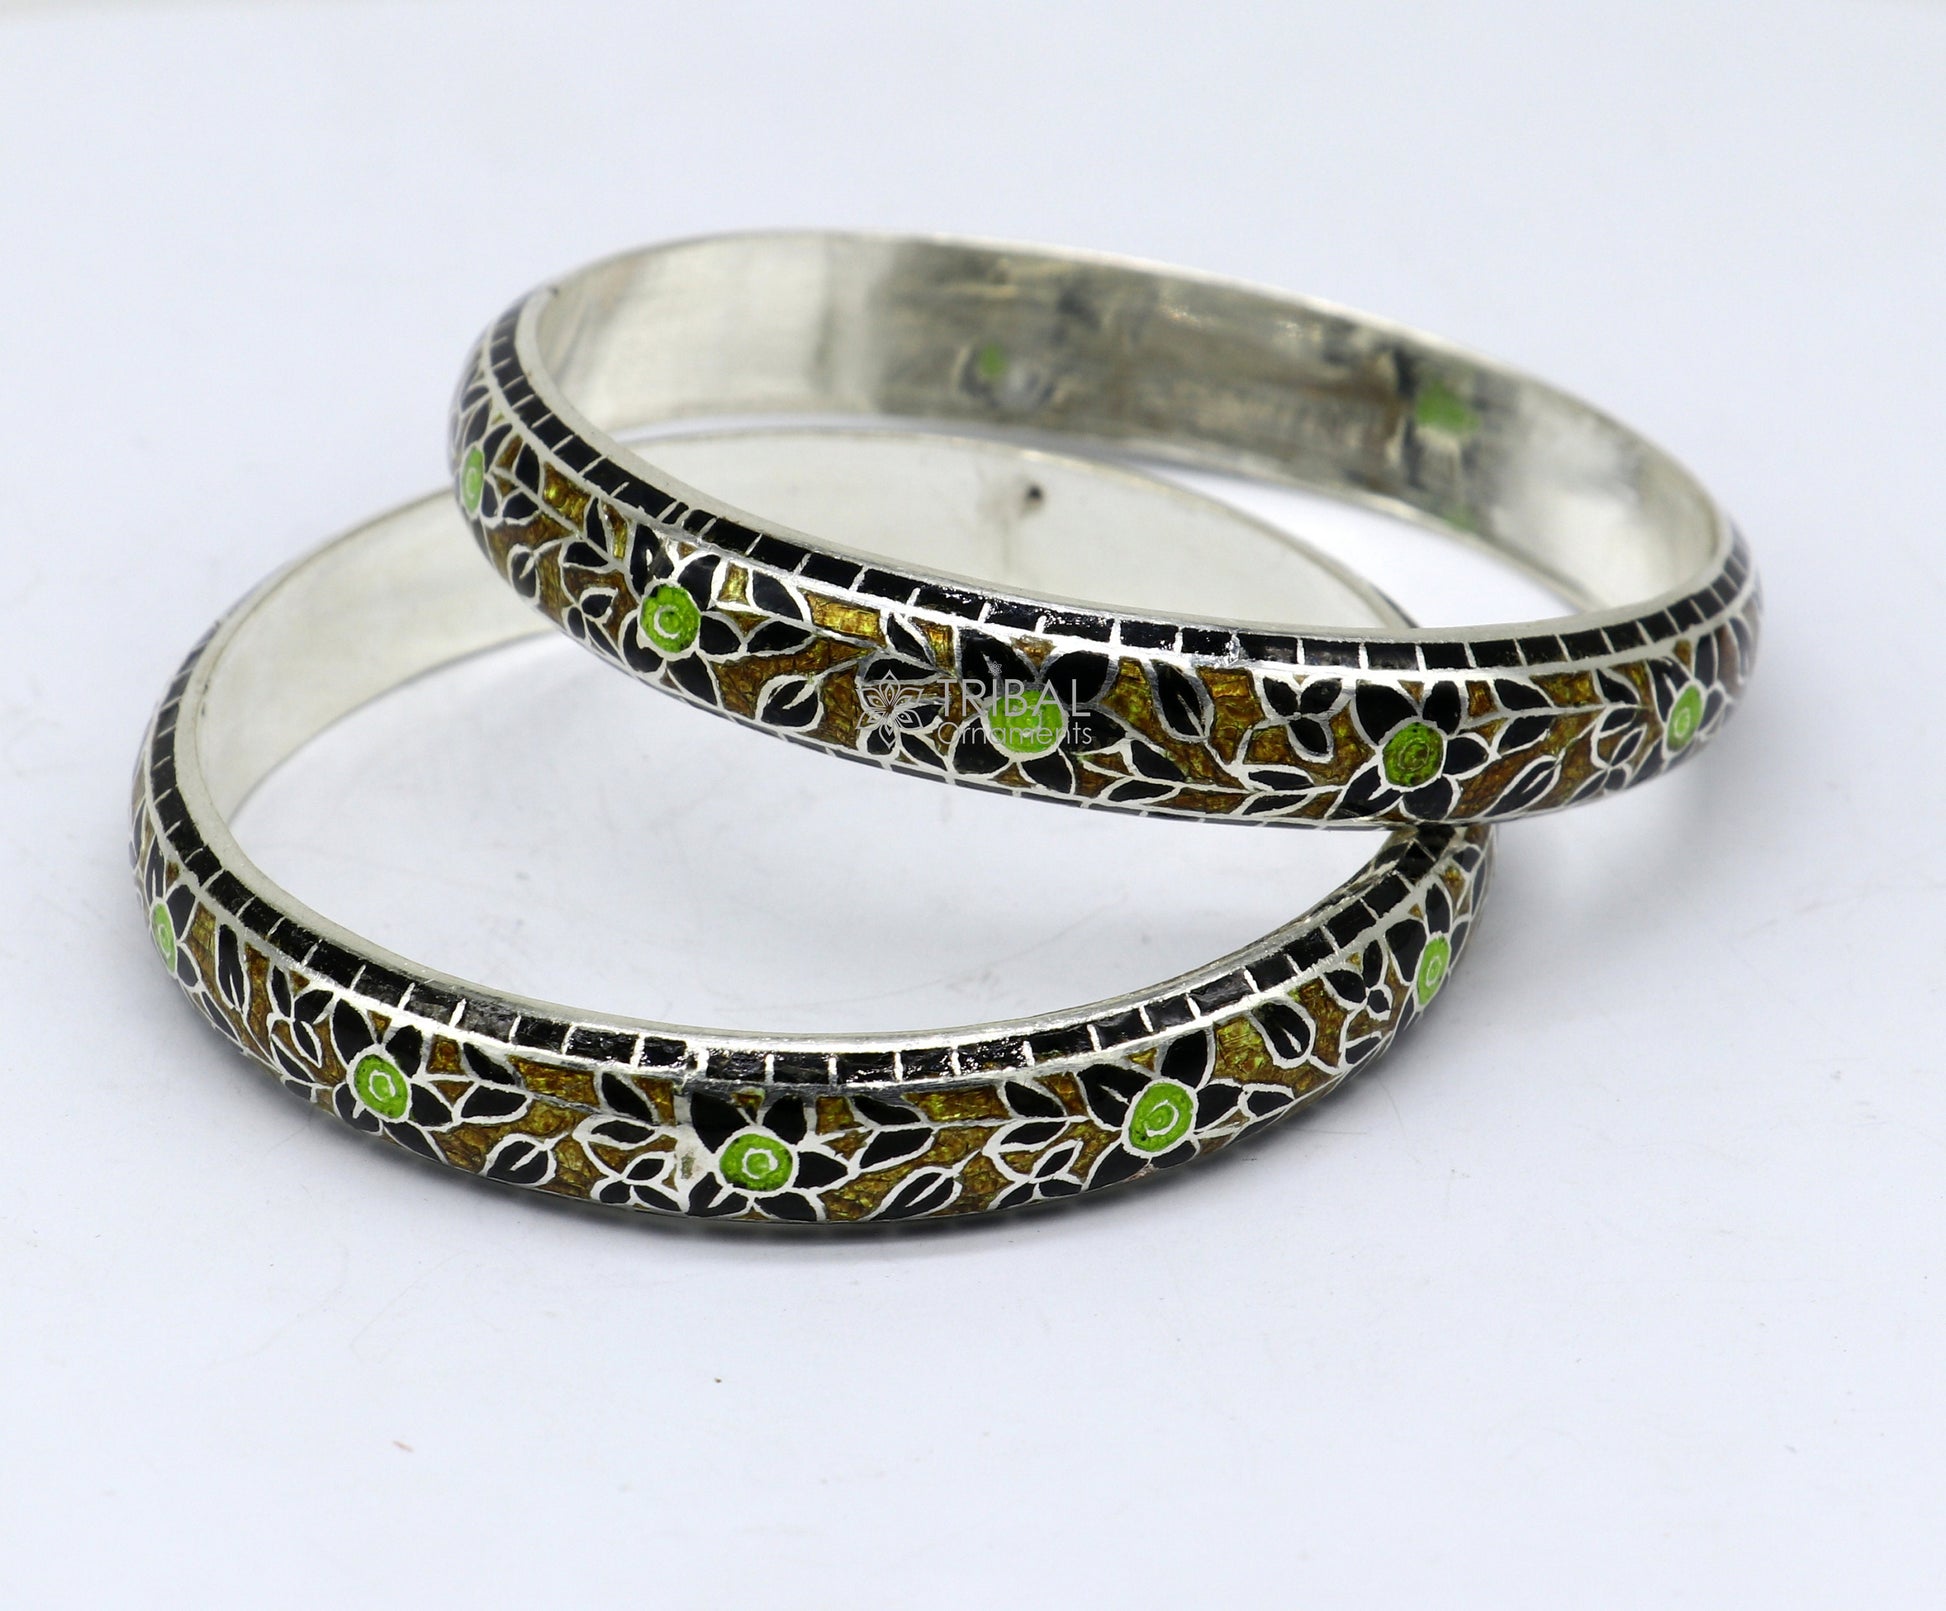 925 Sterling silver Traditional cultural design meenakari (color enamel )bangles bracelet brides trendy style jewelry from india nba360 - TRIBAL ORNAMENTS